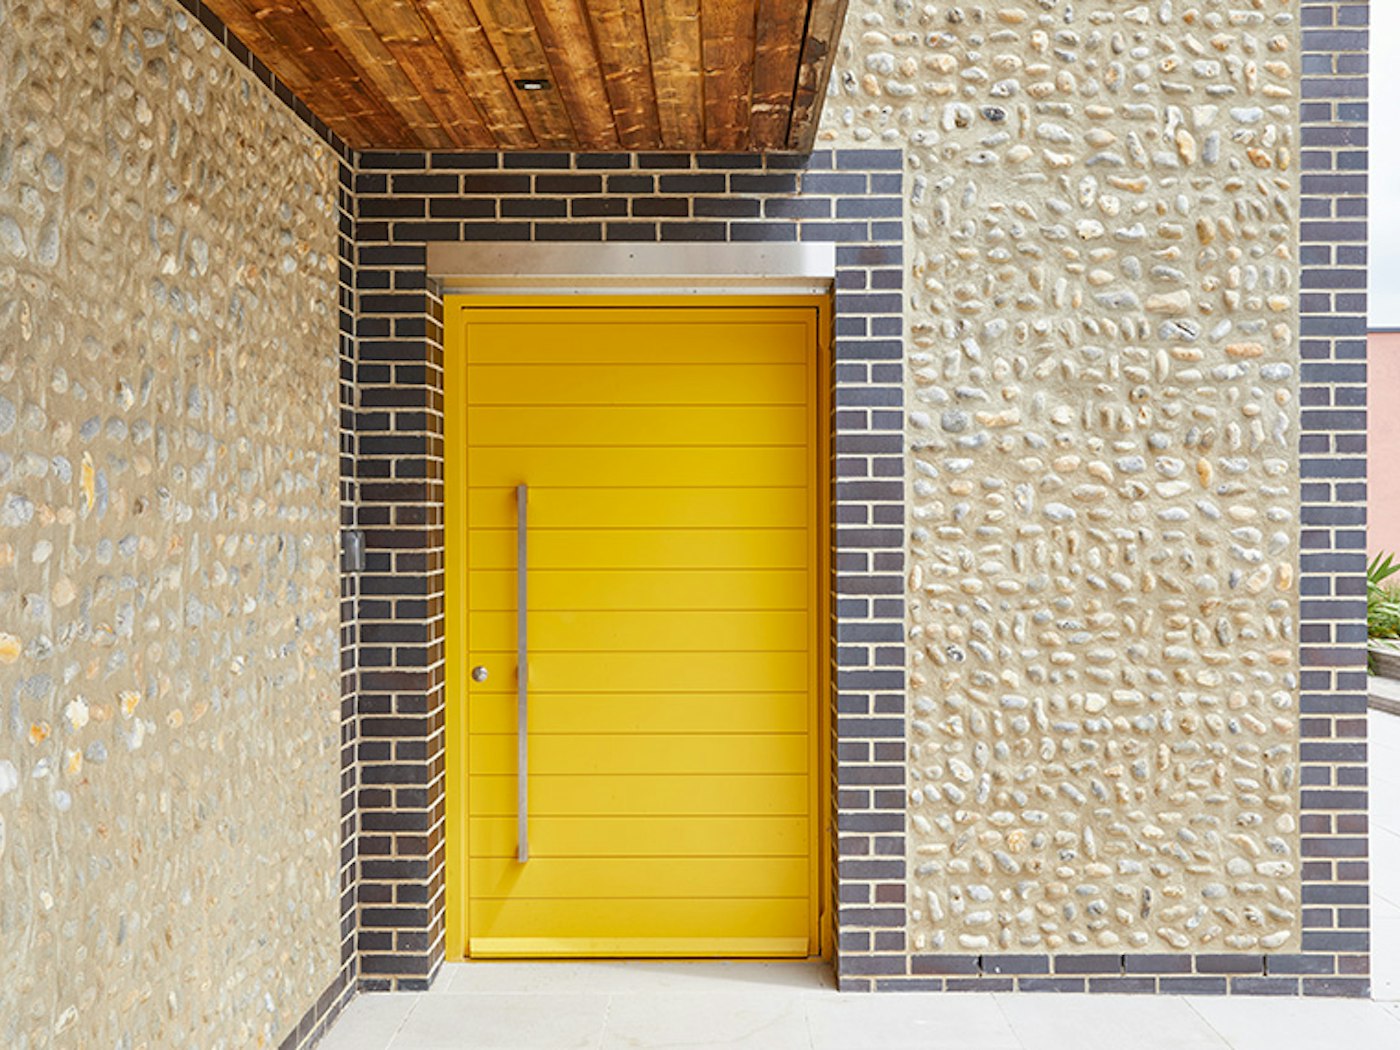 We've always loved a yellow door - this one is famous in Norfolk because it attracts attention